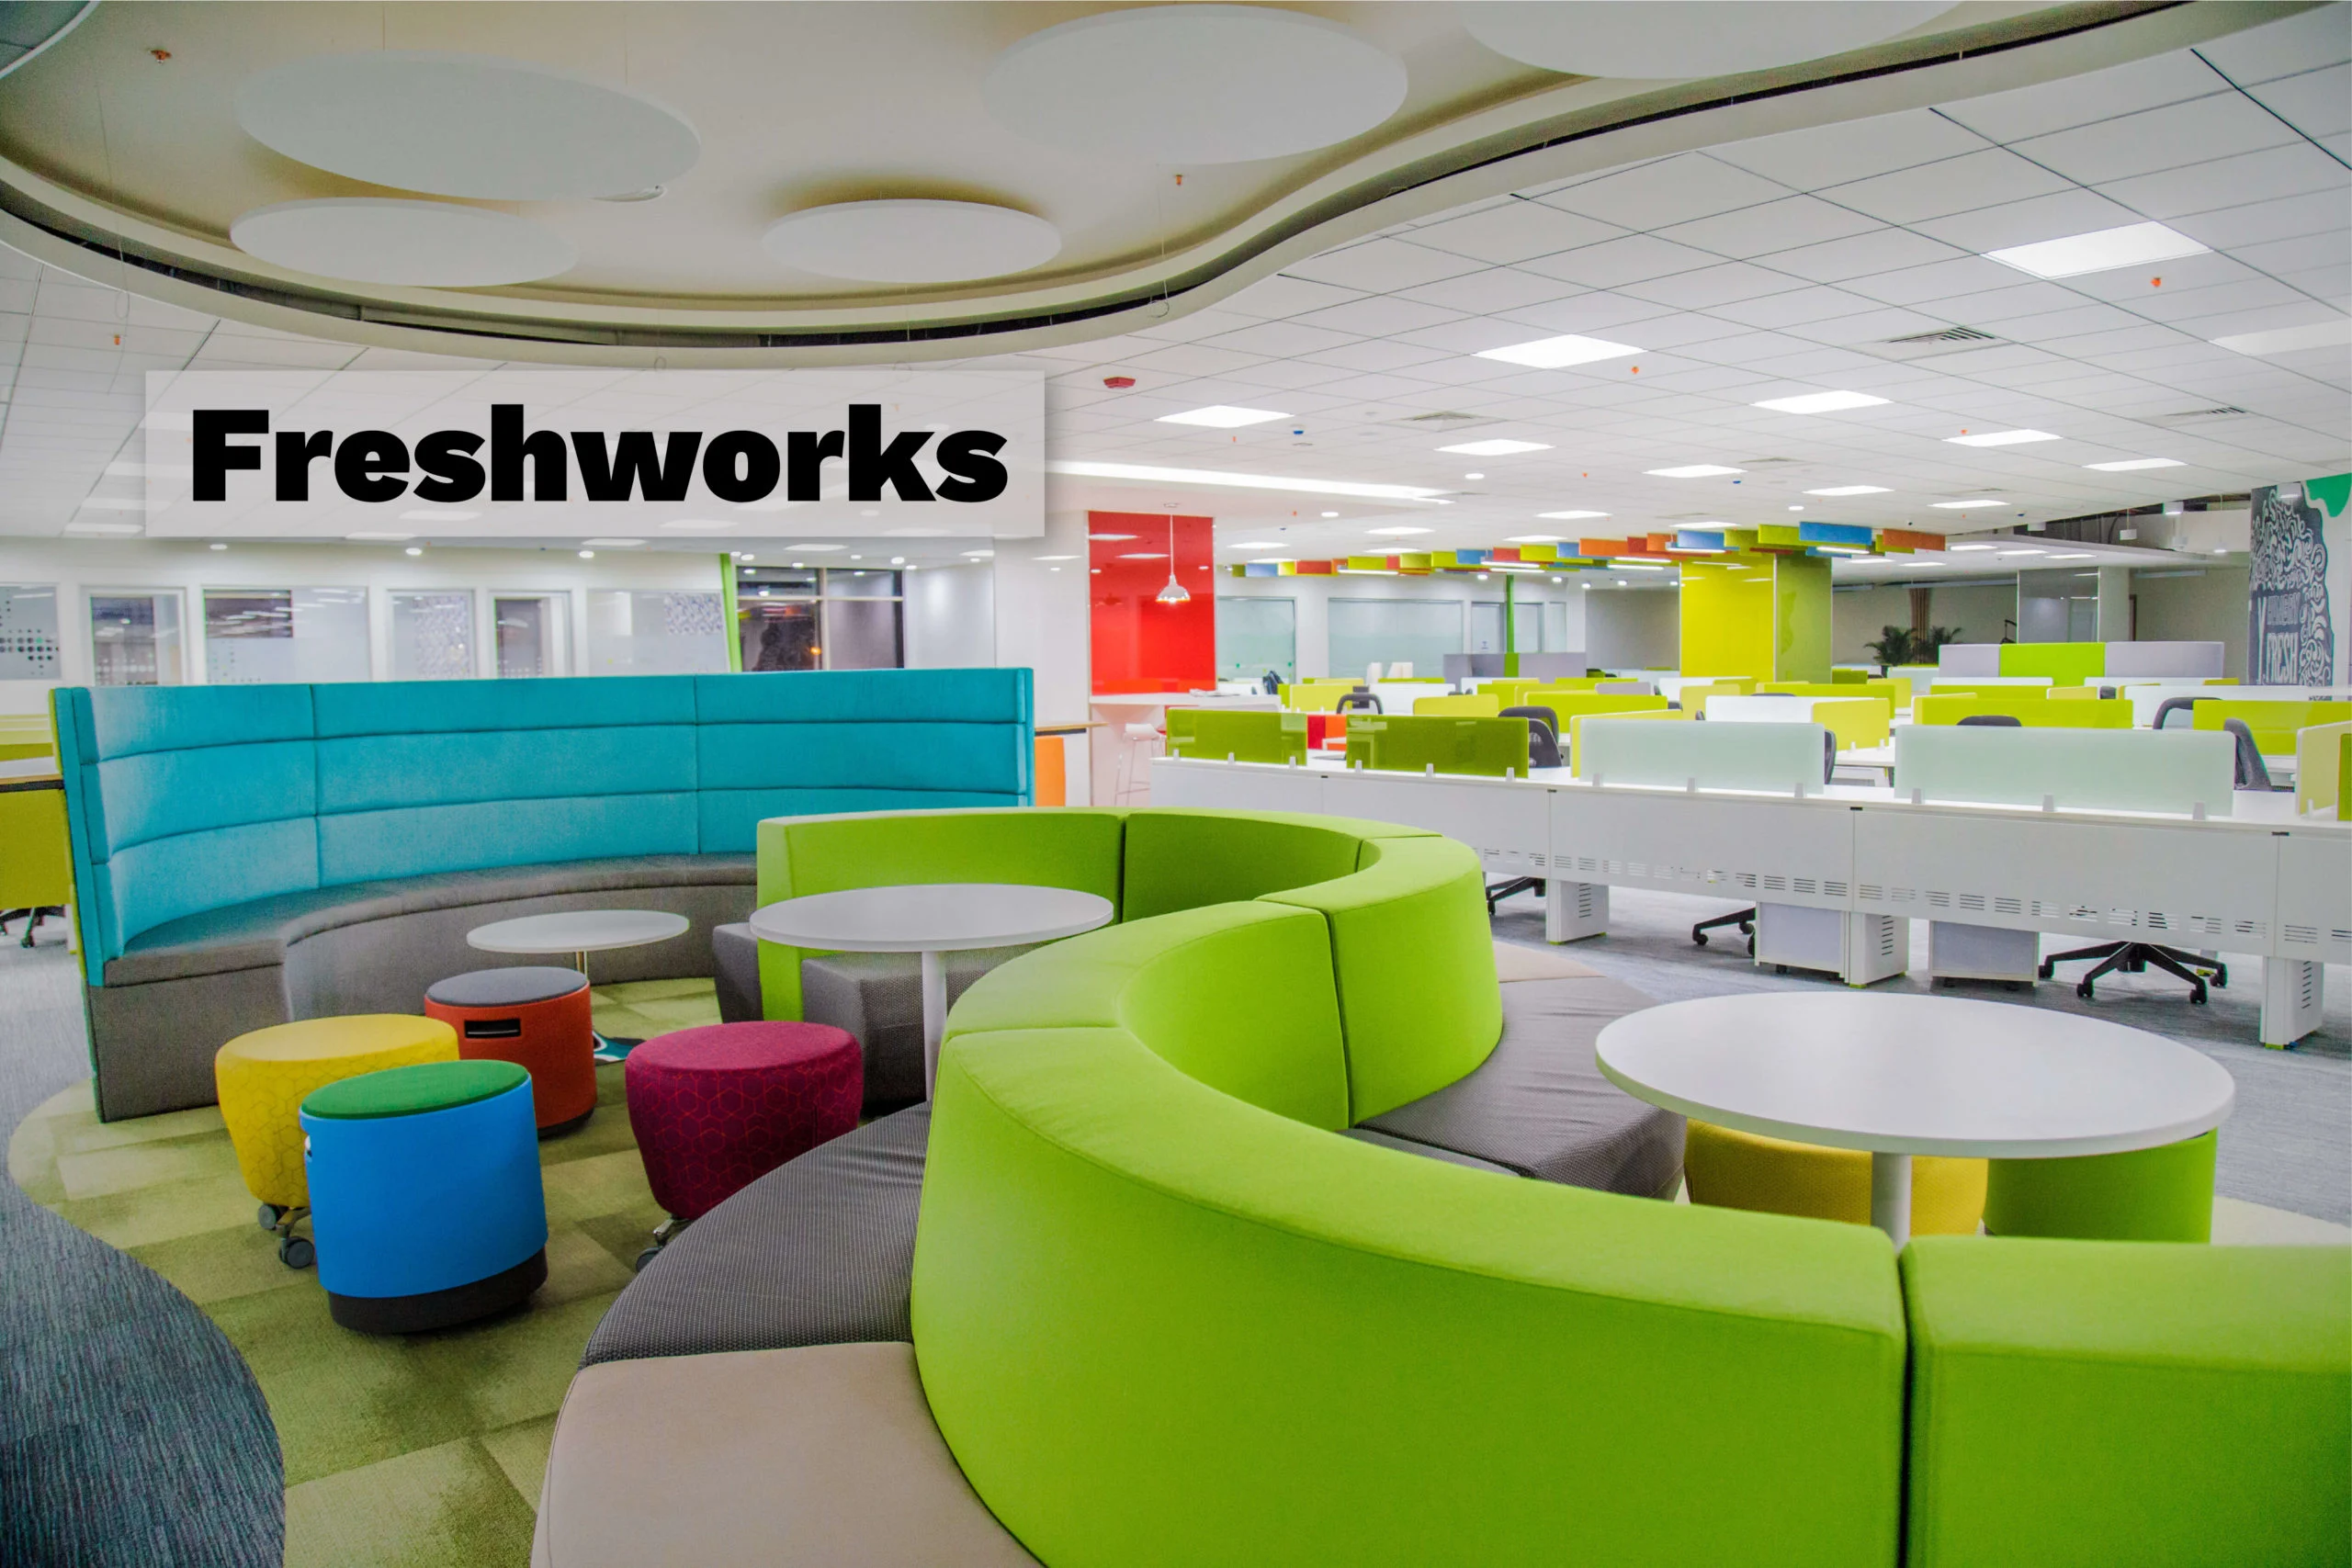 Freshworks appoints Dennis Woodside as CEO, founder Girish Mathrubootham becomes exec chairman